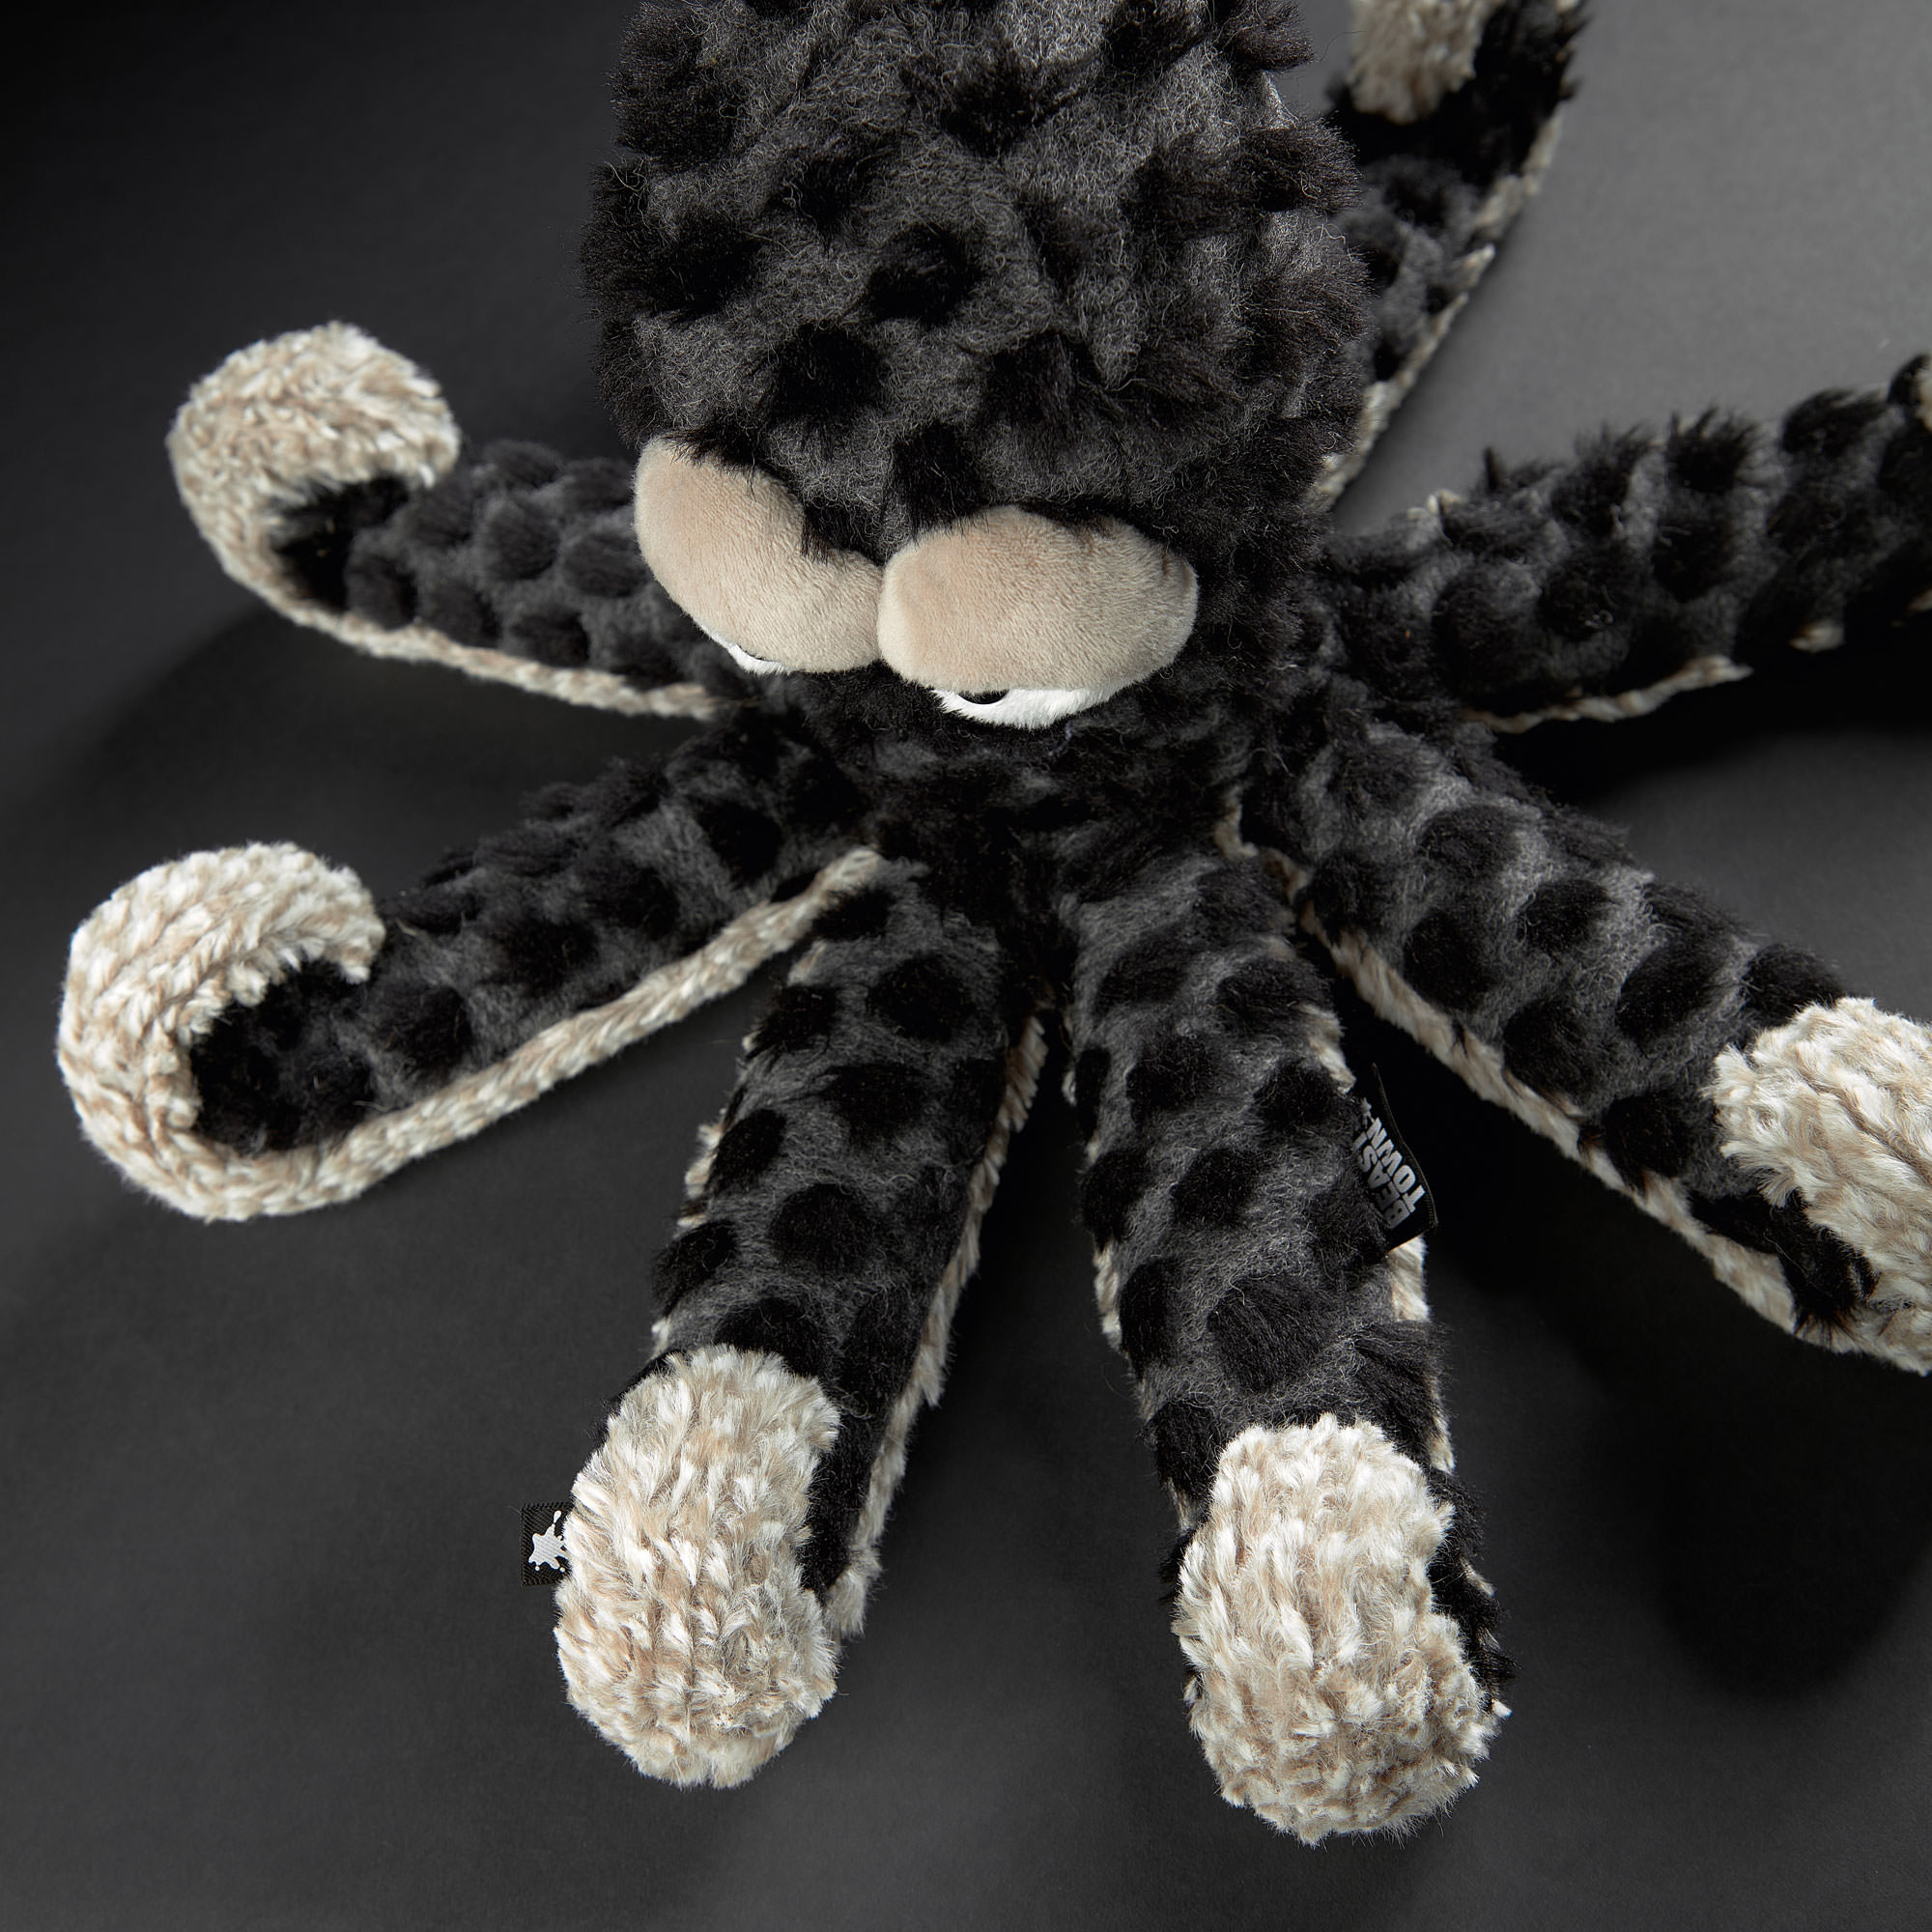 Plush toy octopus Deep Water Dandy, Beasts collection